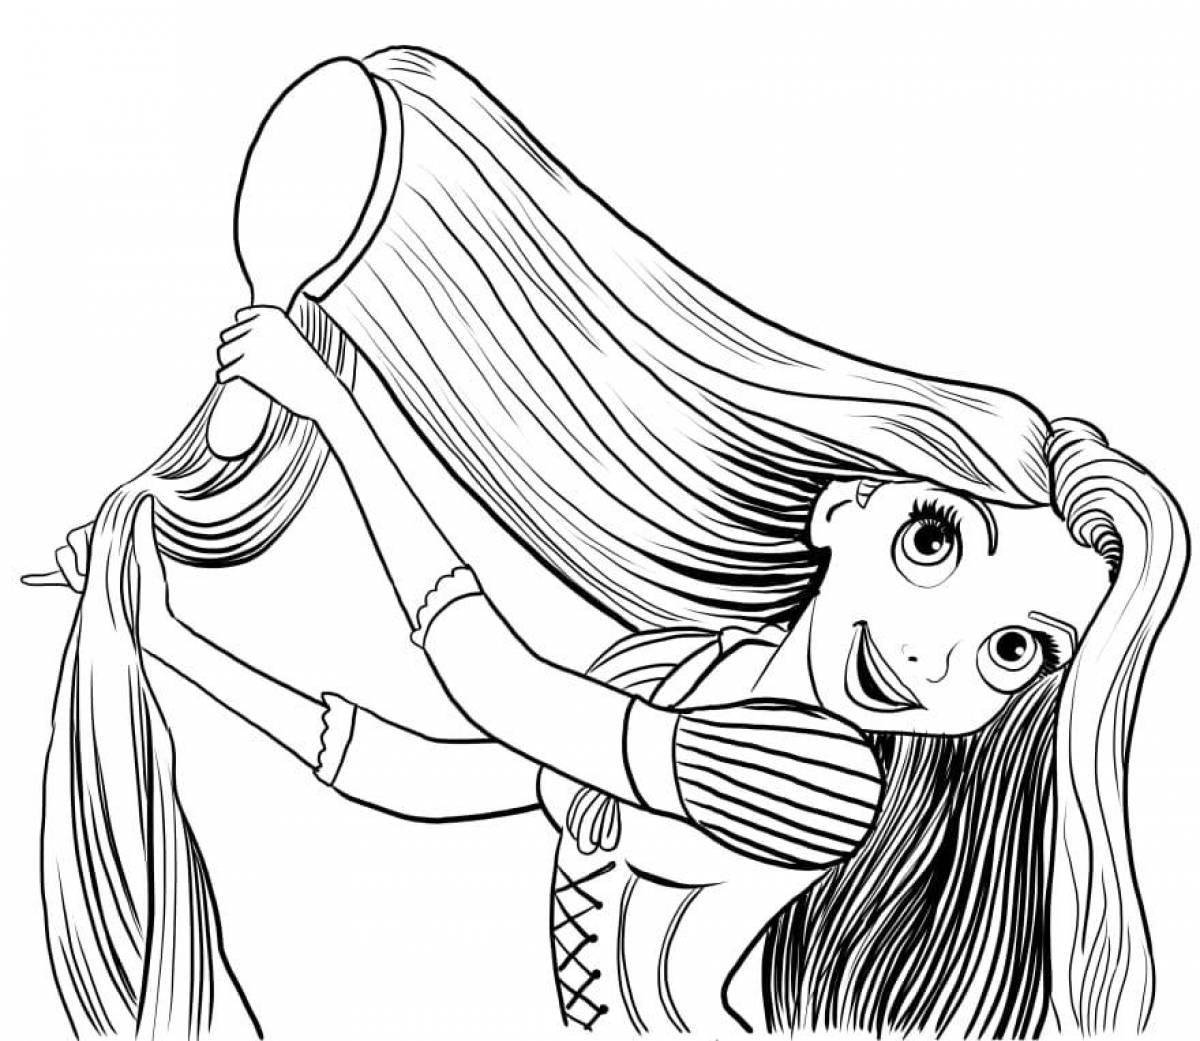 Down hair coloring page